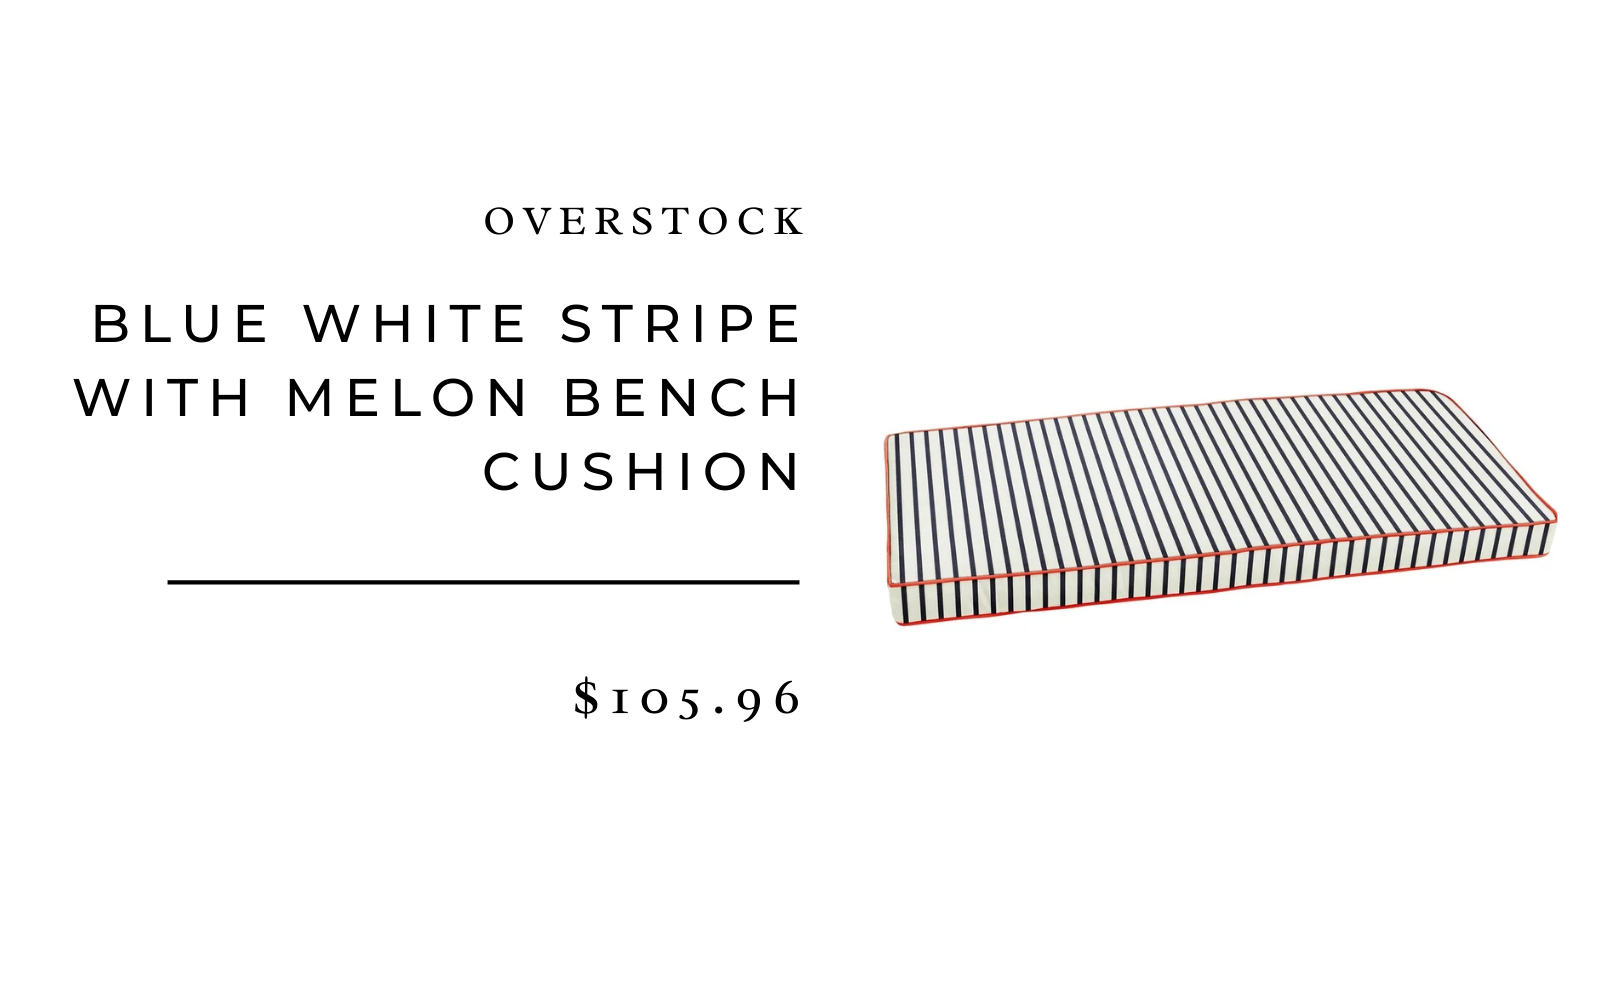 white stripe with melon bench cushion overstock